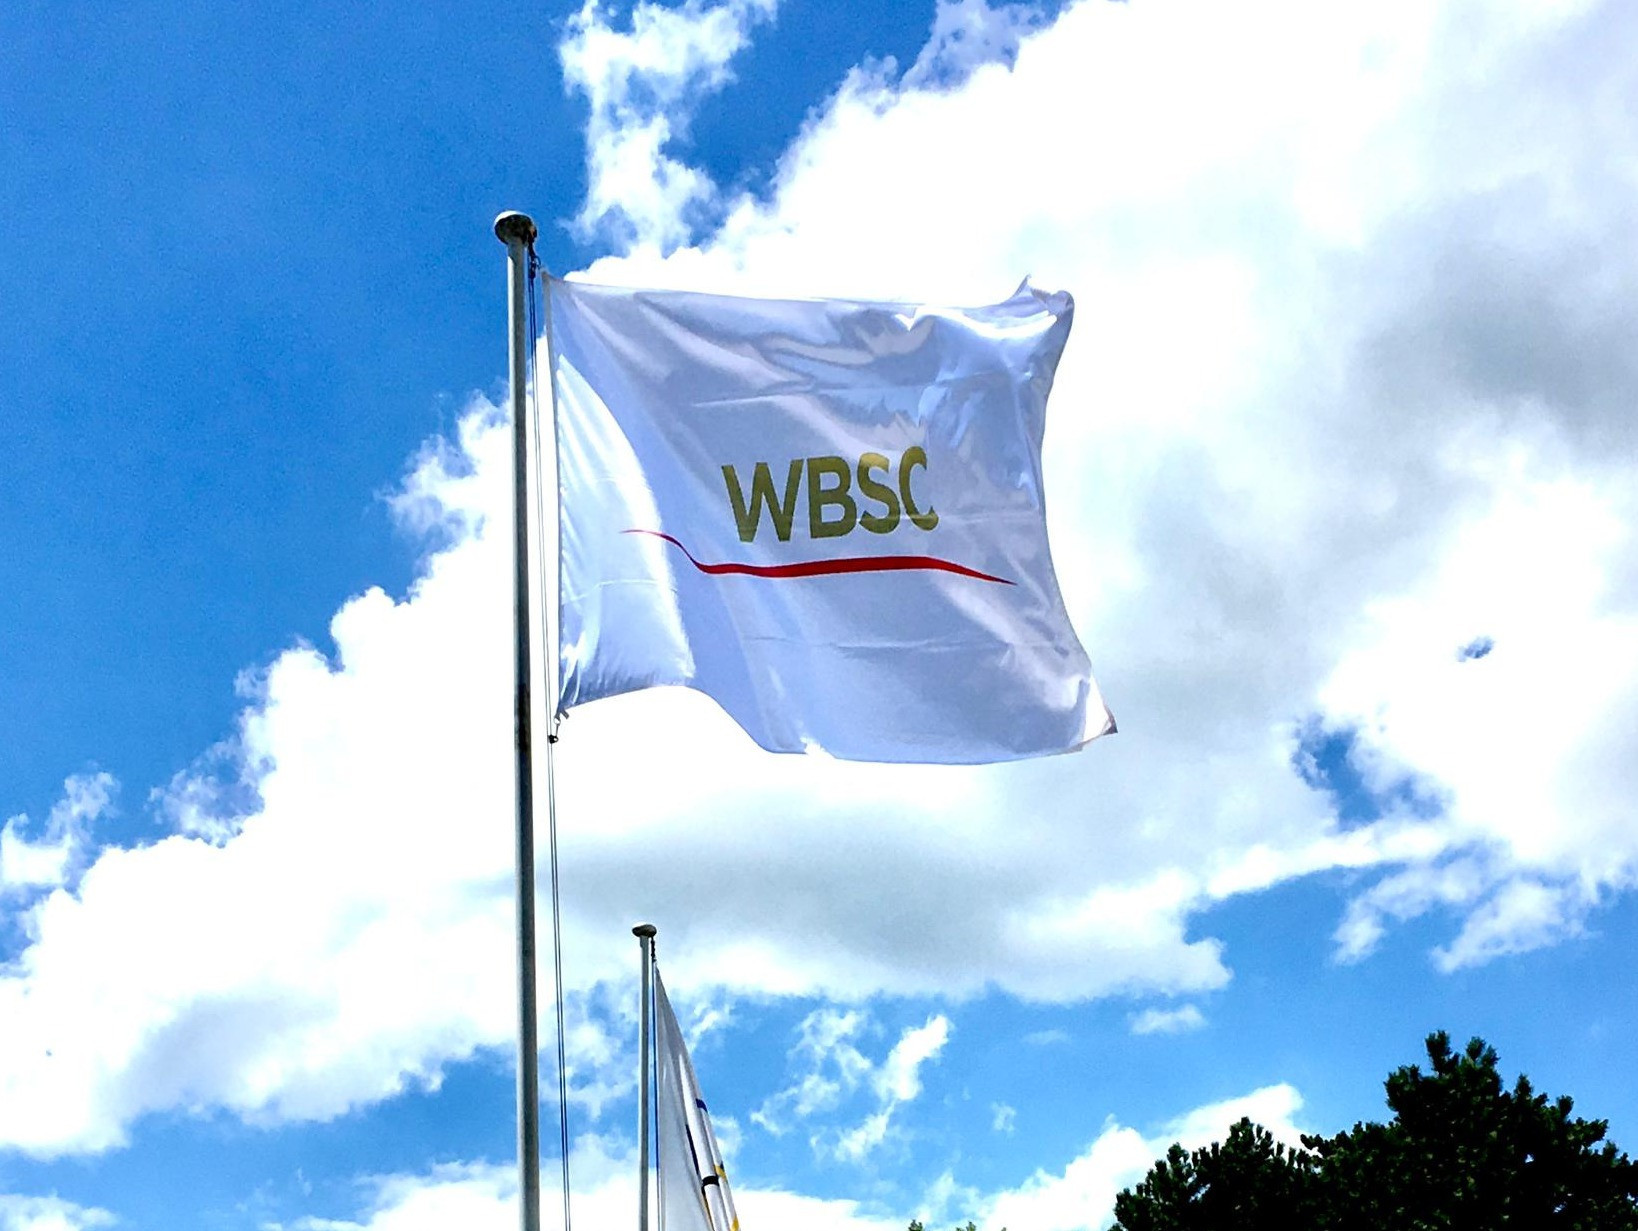 WBSC Presidential Council discuss strategy for during and after coronavirus pandemic